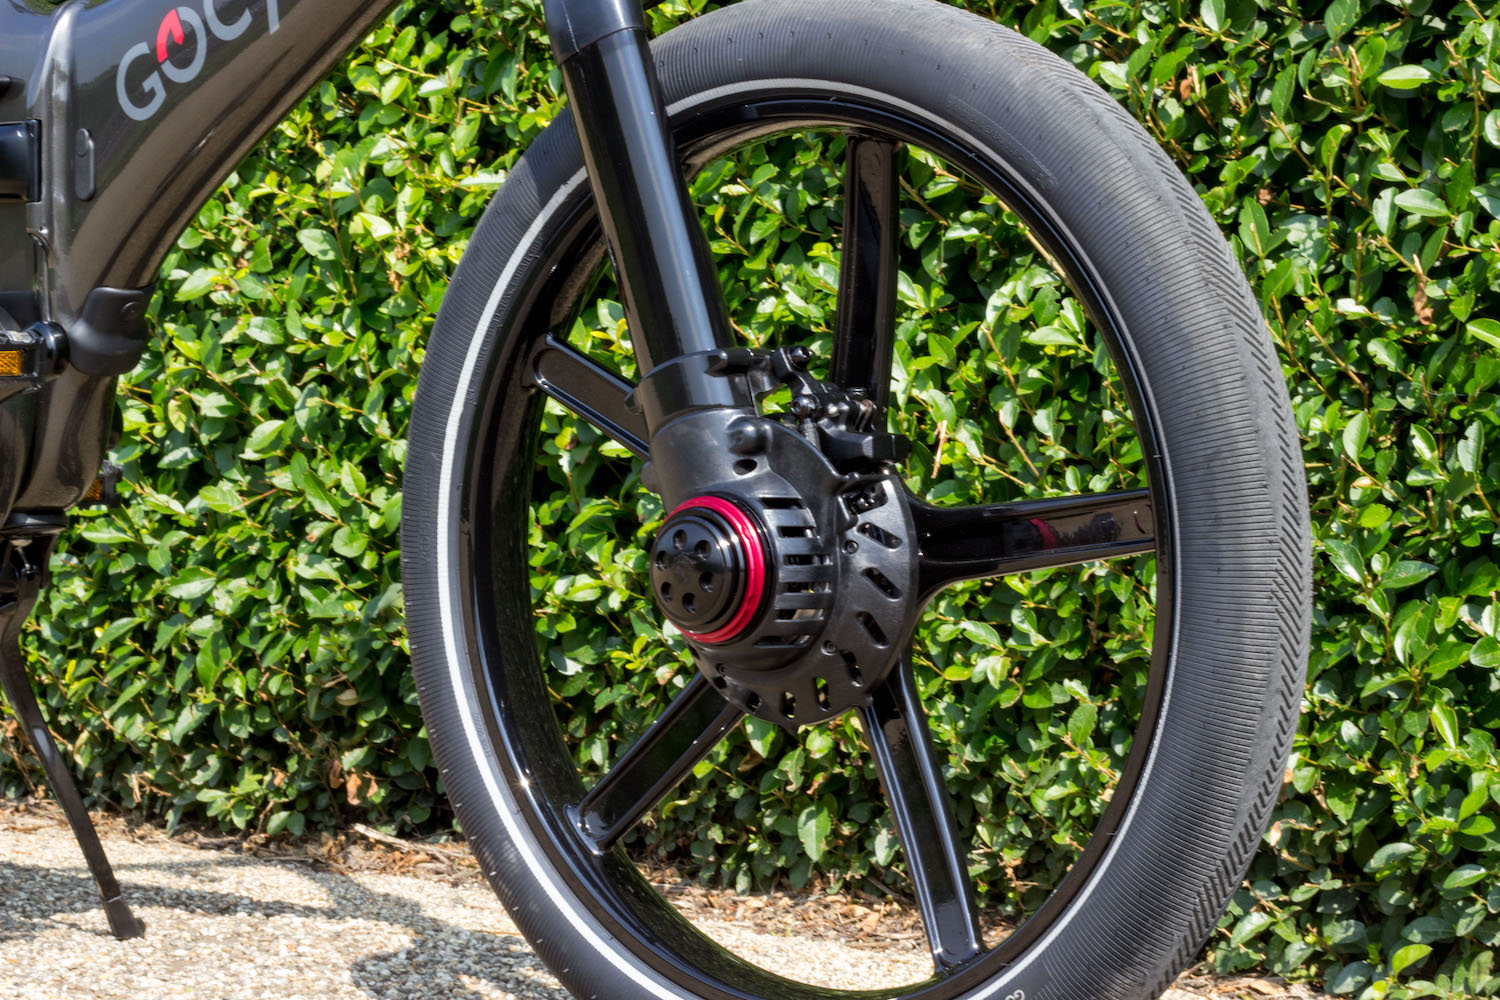 gocycles new gxi electric bike can fold away in a mere 10 seconds gocycle 4